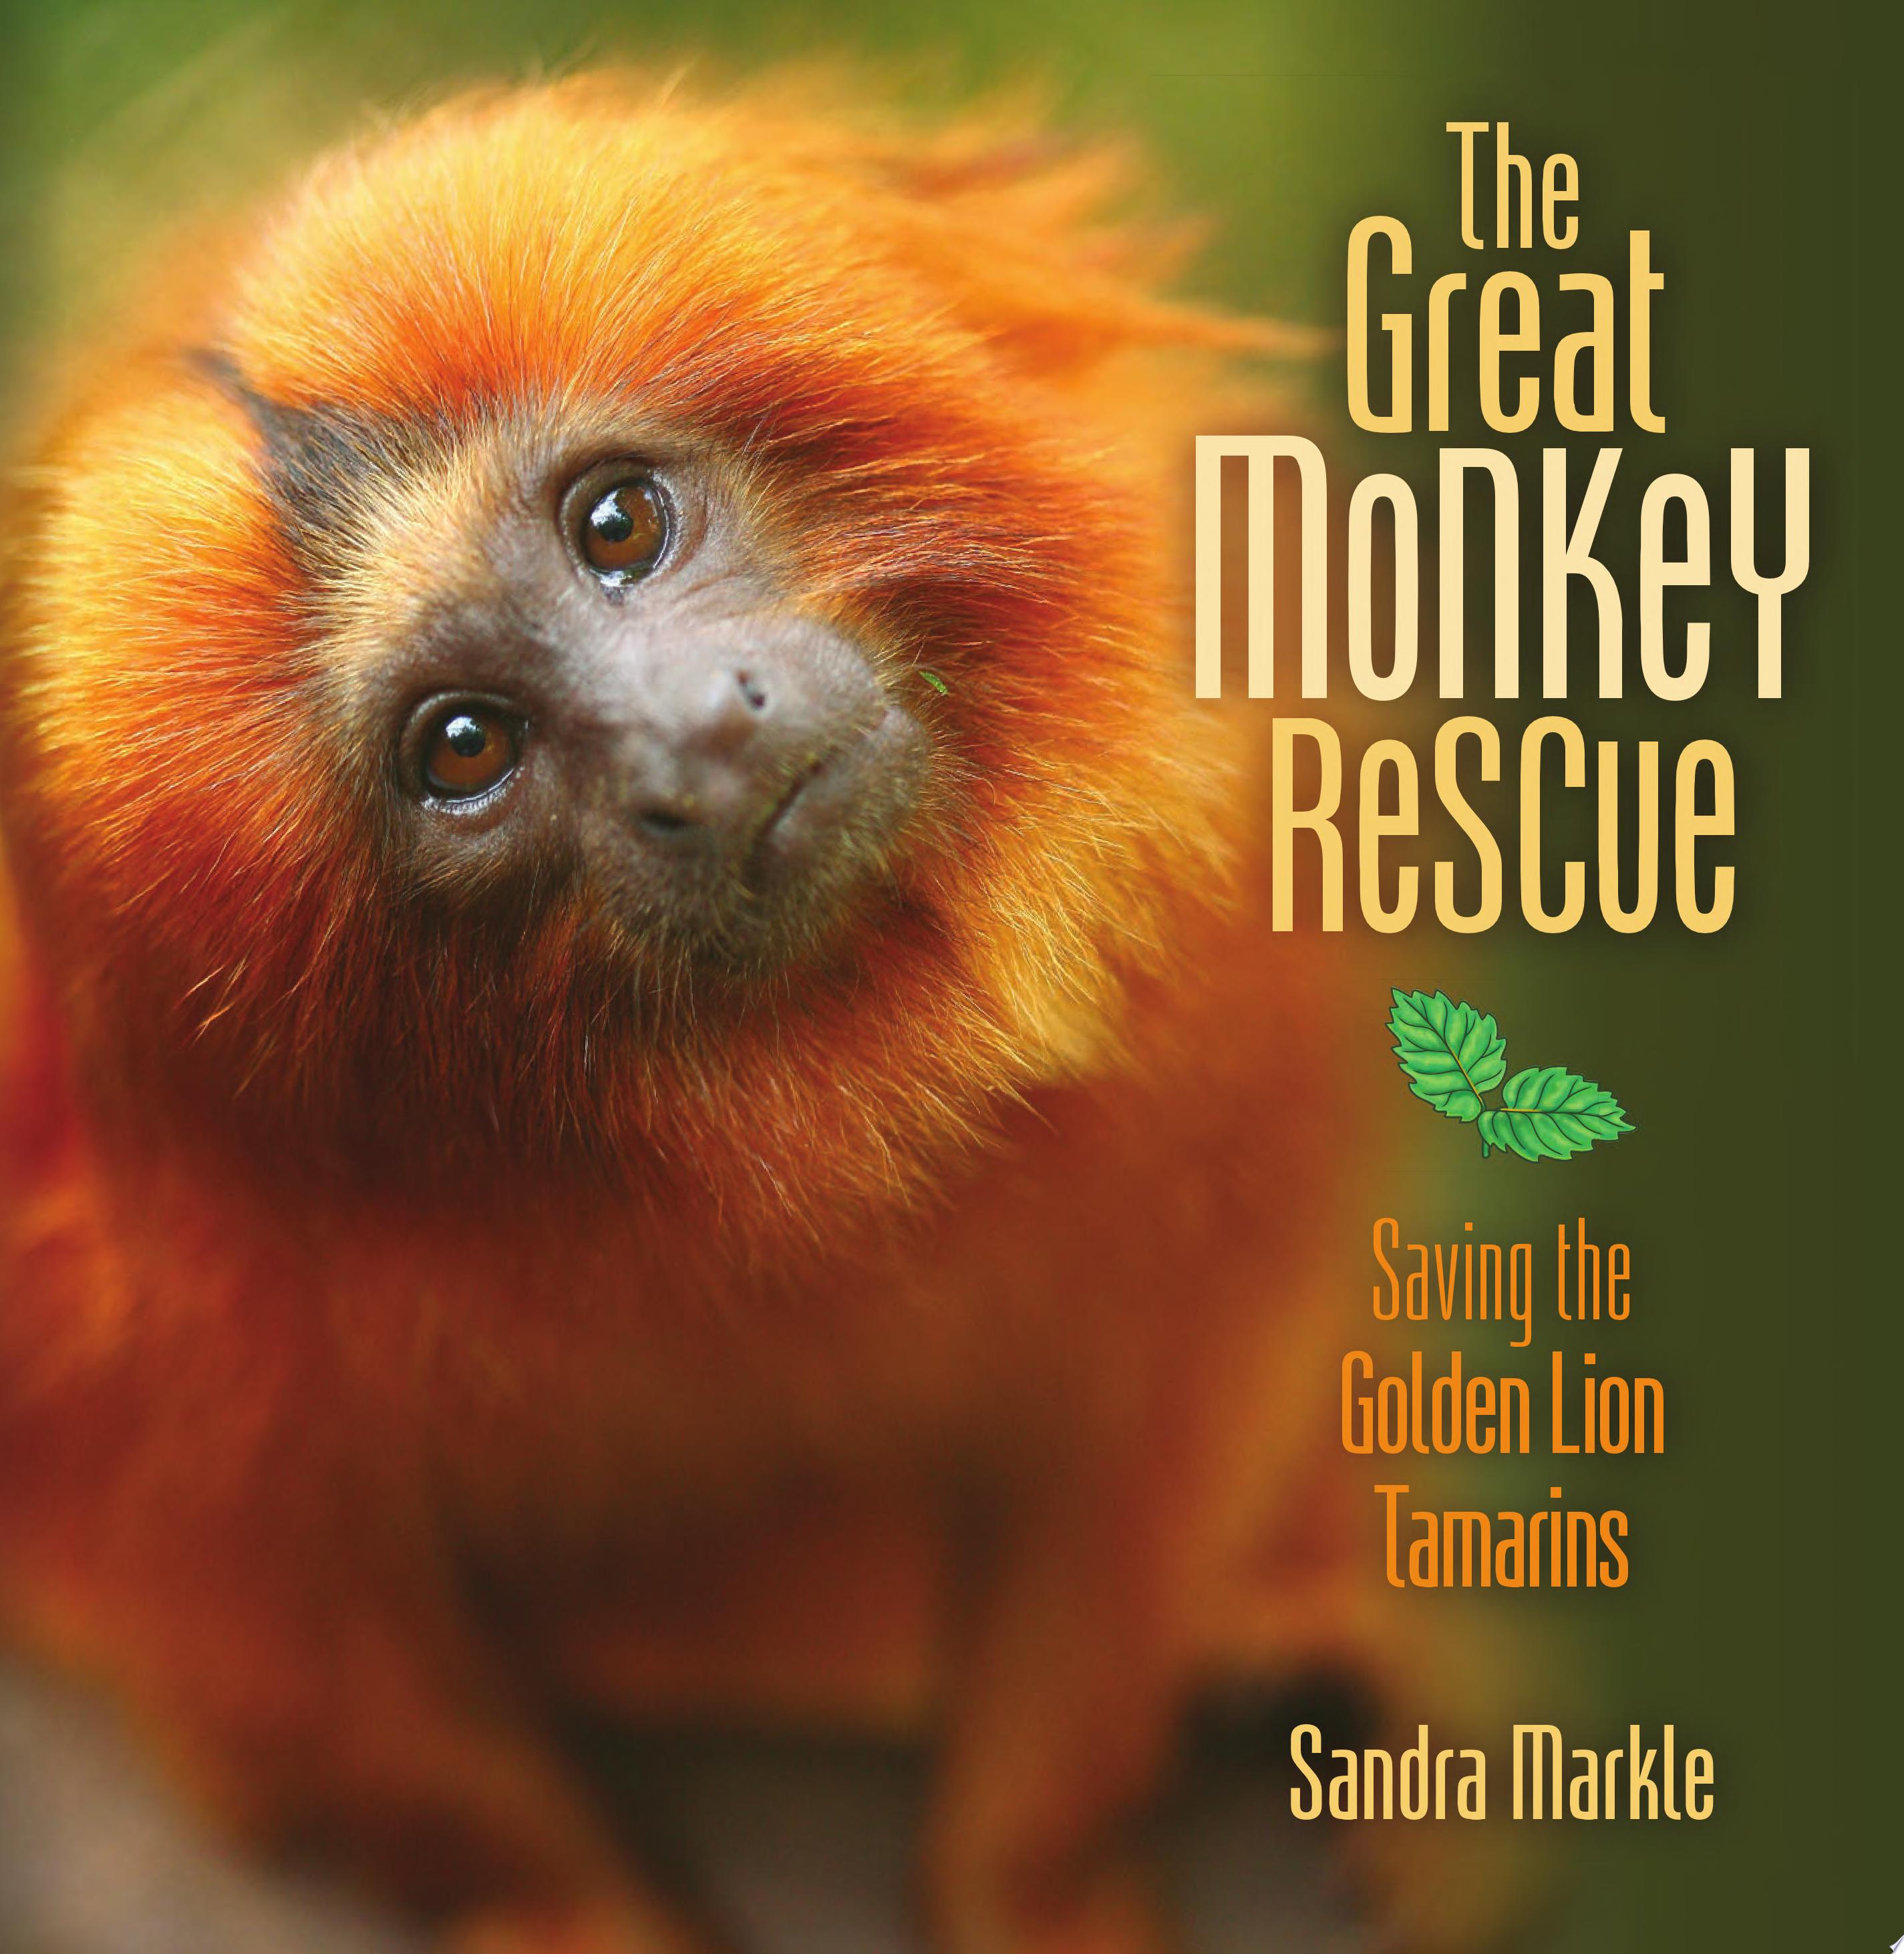 Image for "The Great Monkey Rescue: saving the golden lion tamarins"